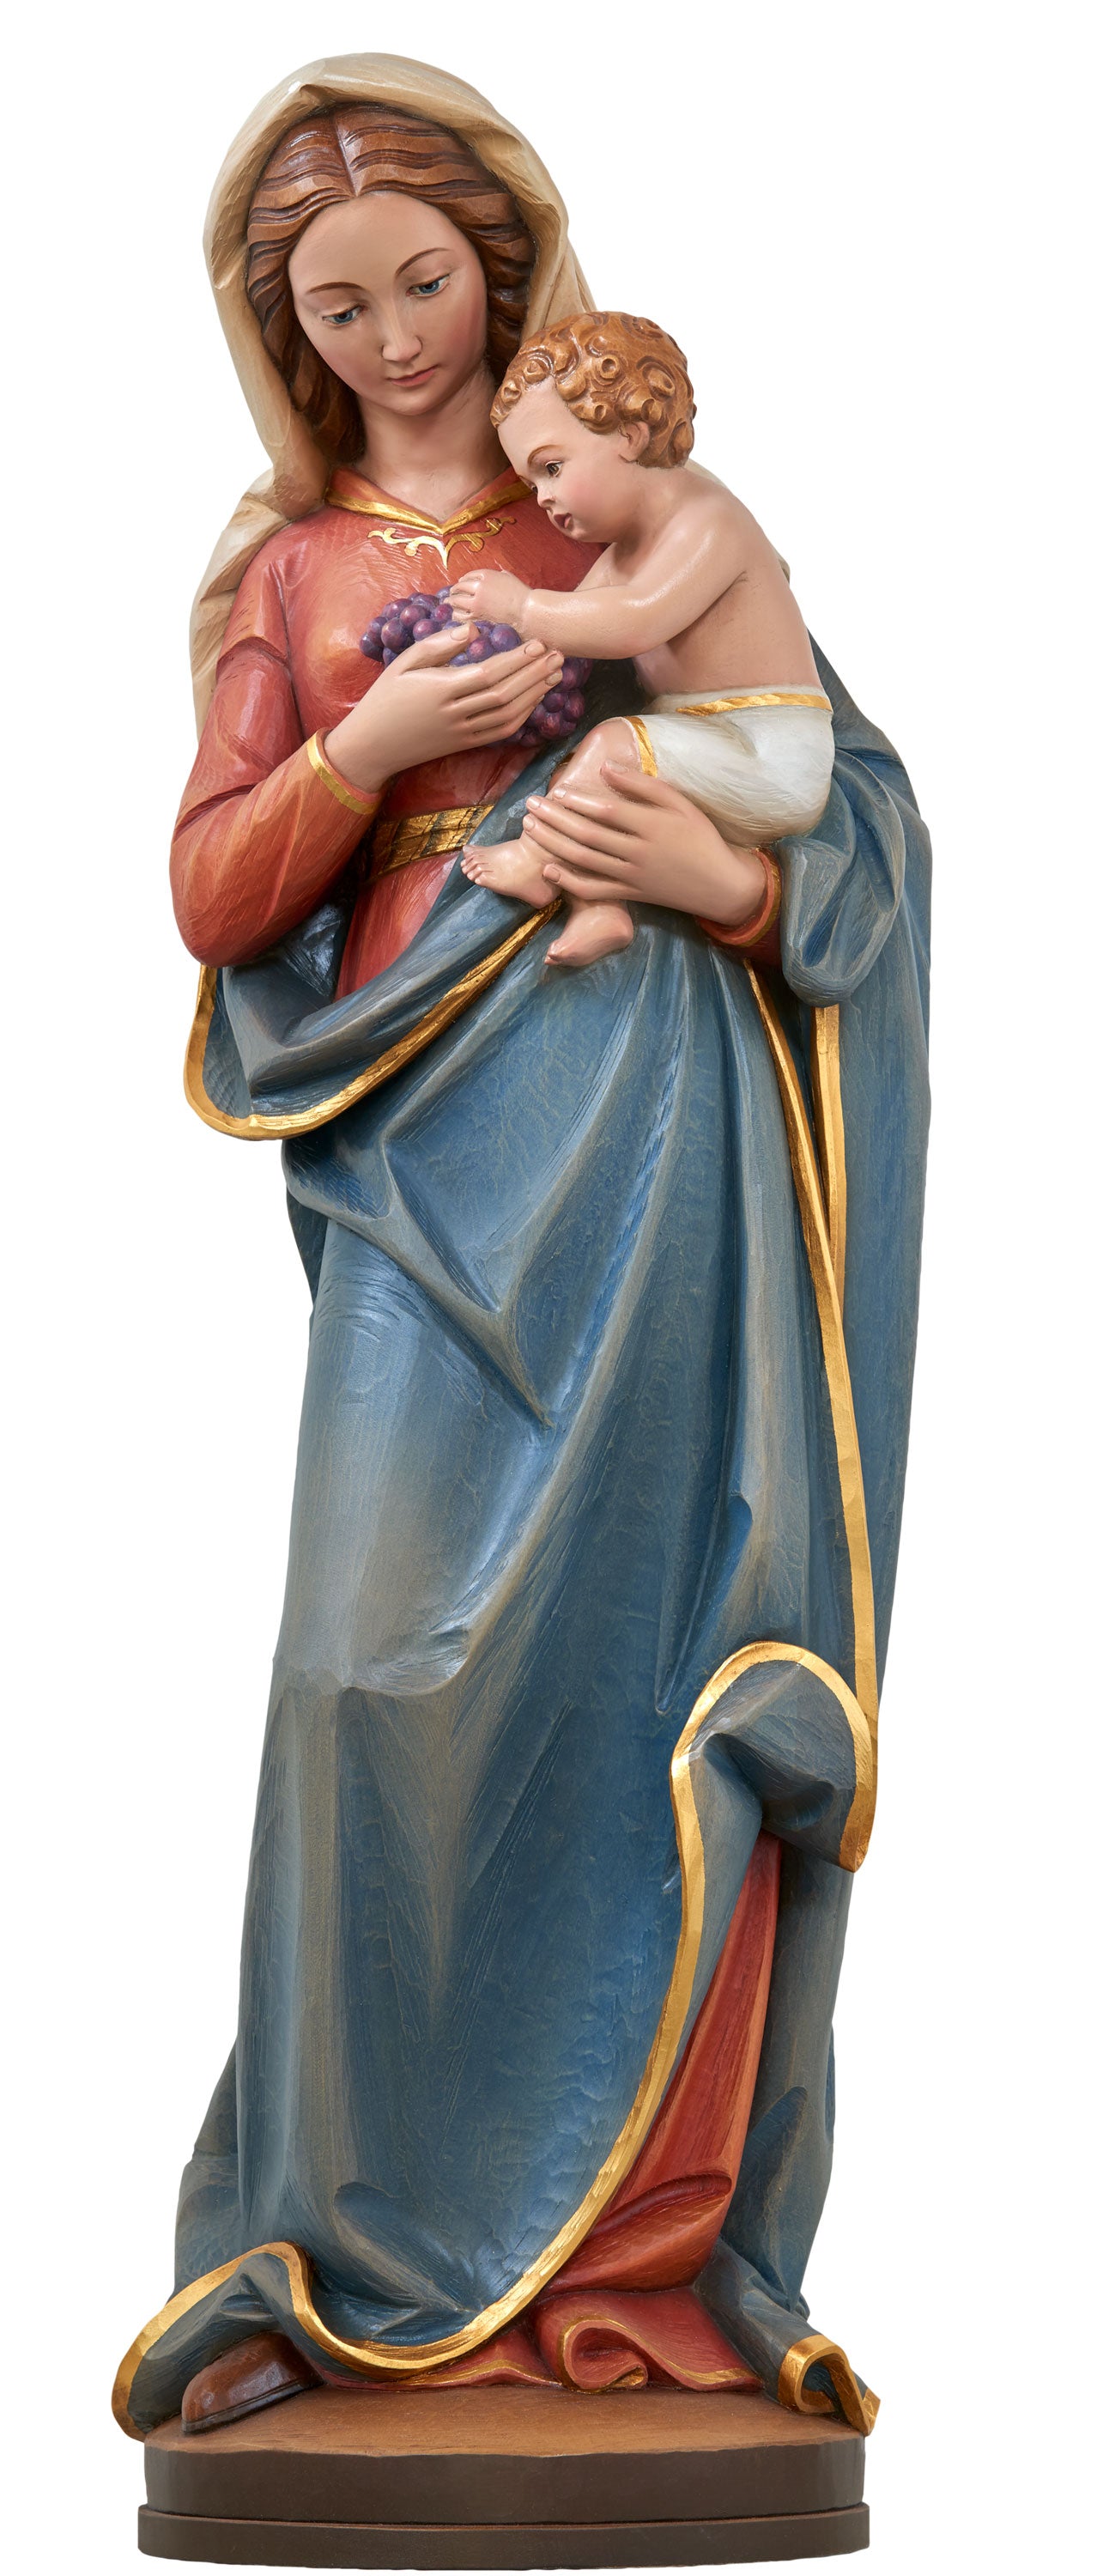 our-lady-with-child-jesus-and-grapes-statue-700-37.jpg